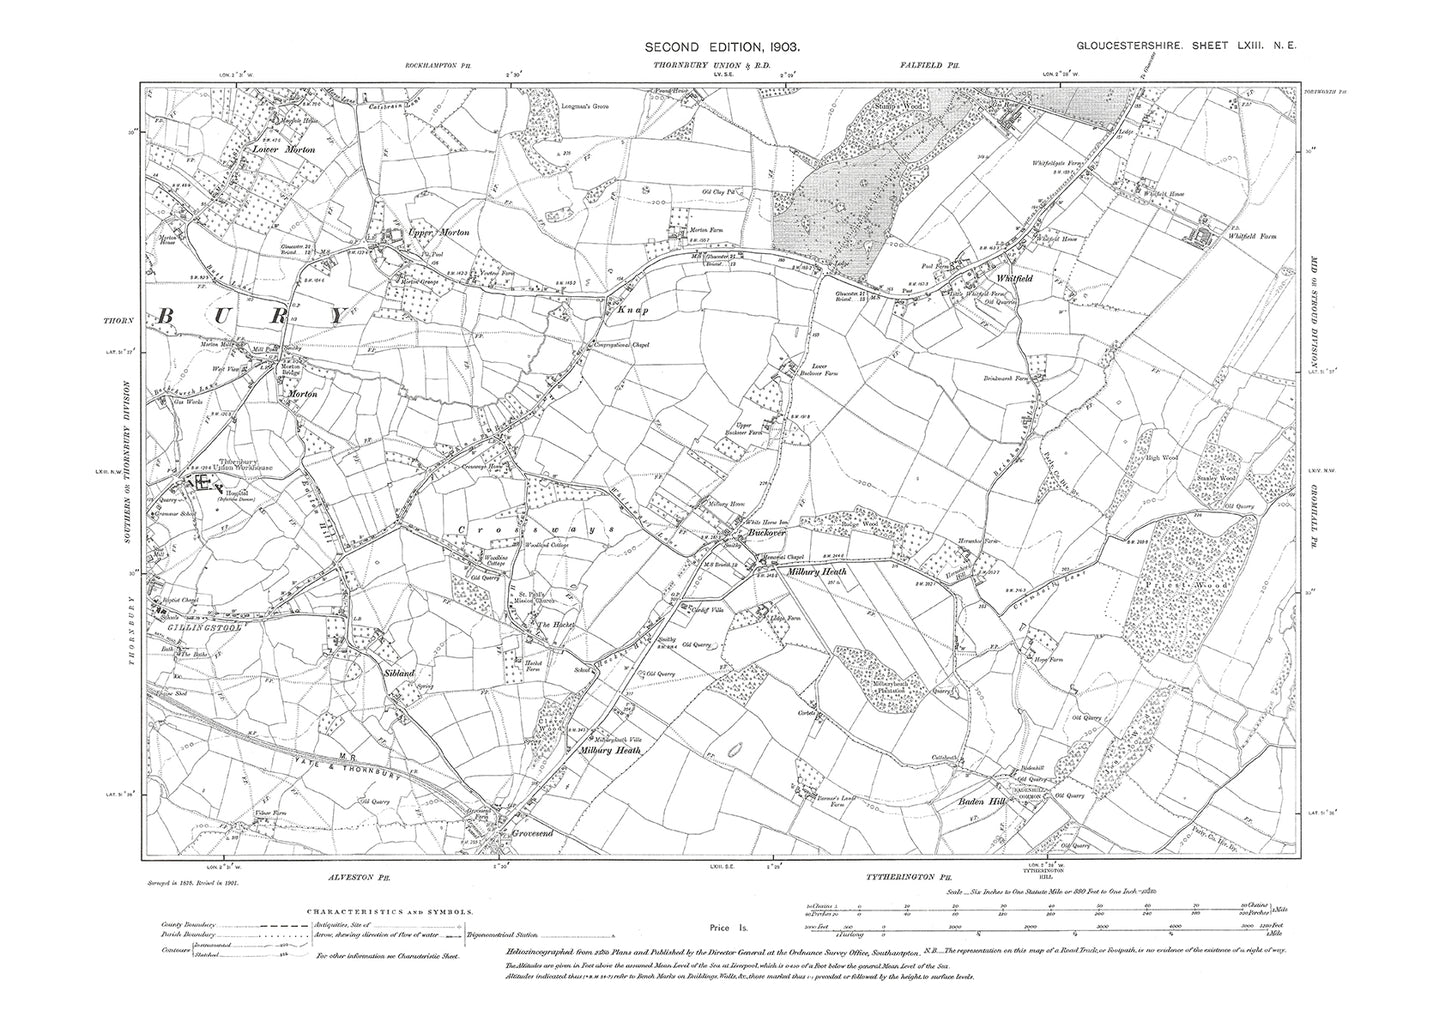 Old OS map dated 1903, showing Morton, Whitfield, Thornbury (east), Milbury Heath, Grovesend in Gloucestershire - 63NE